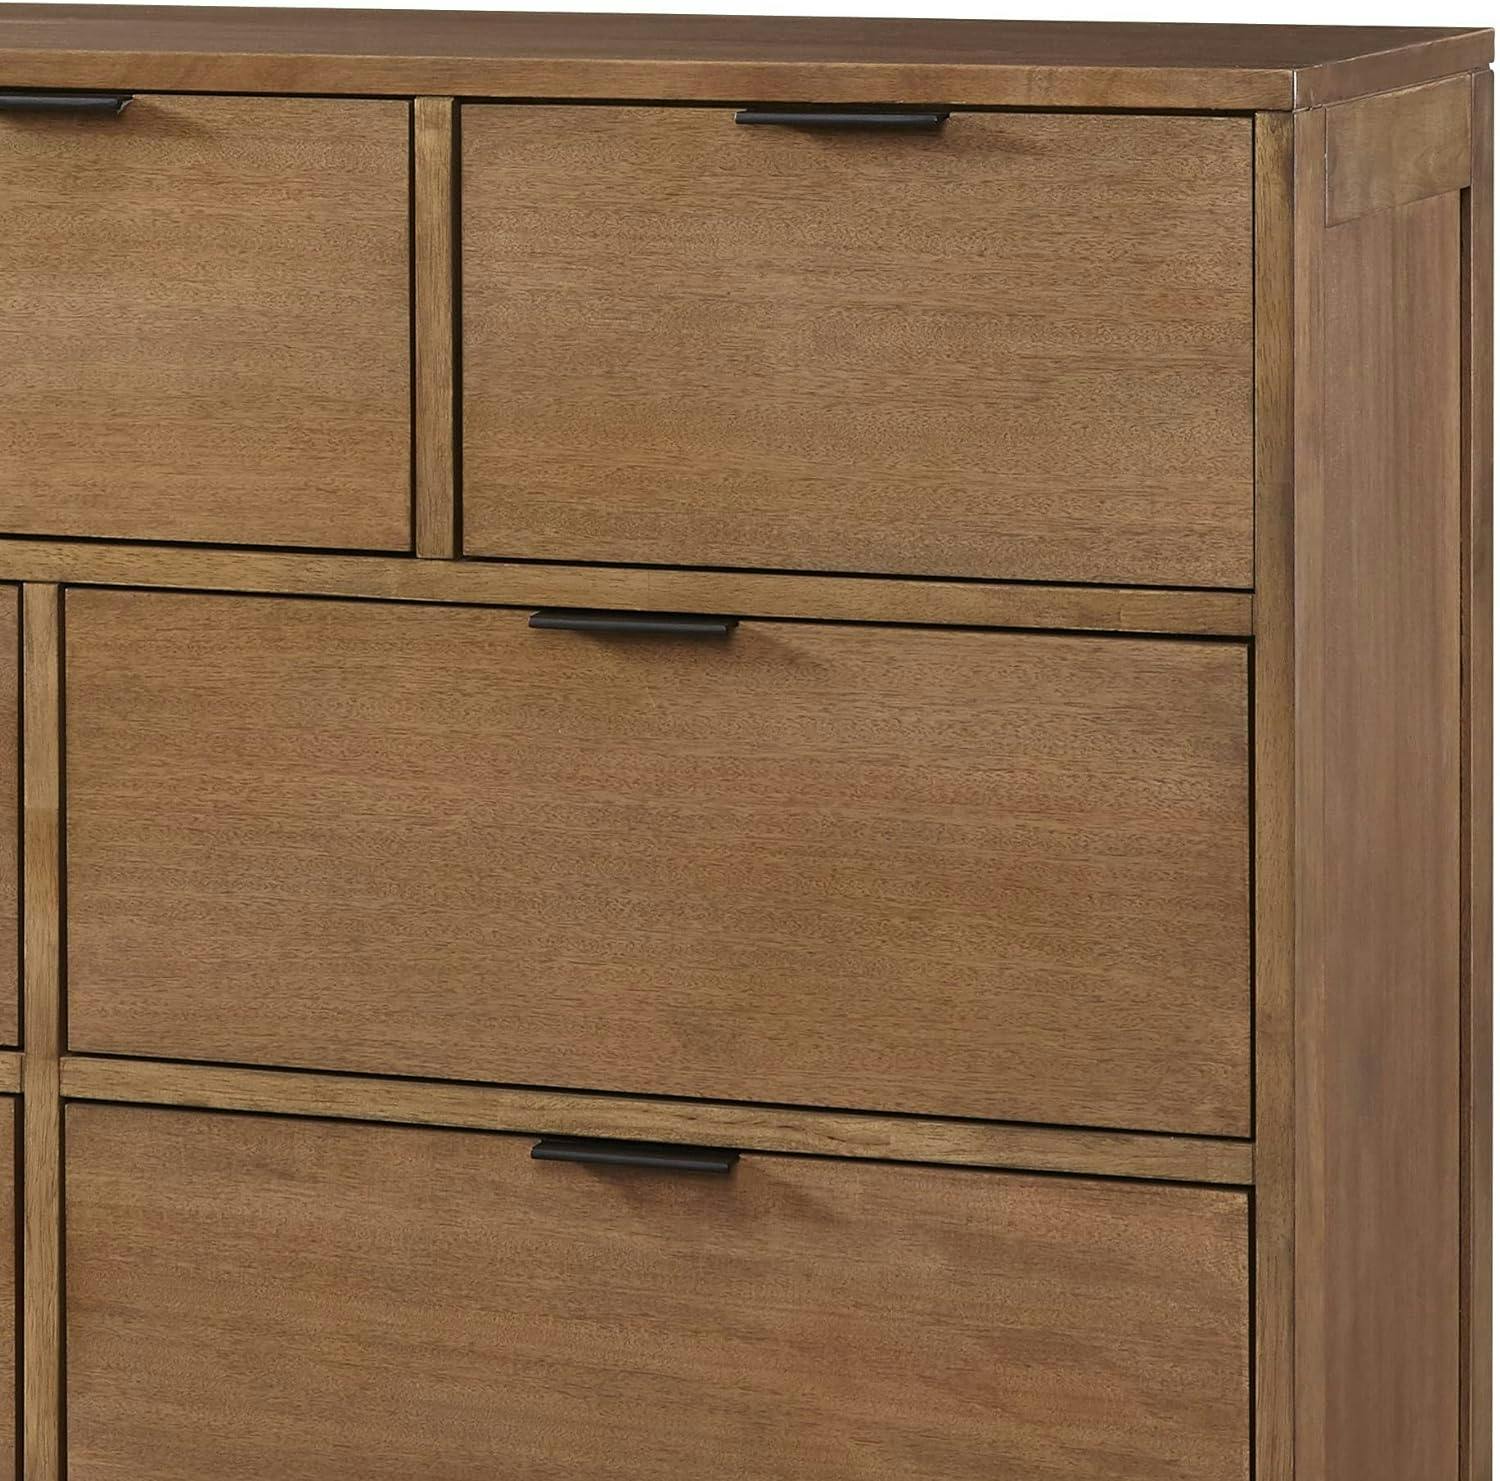 Rustic Jute-Brown 9-Drawer Dresser with Bronze Accents